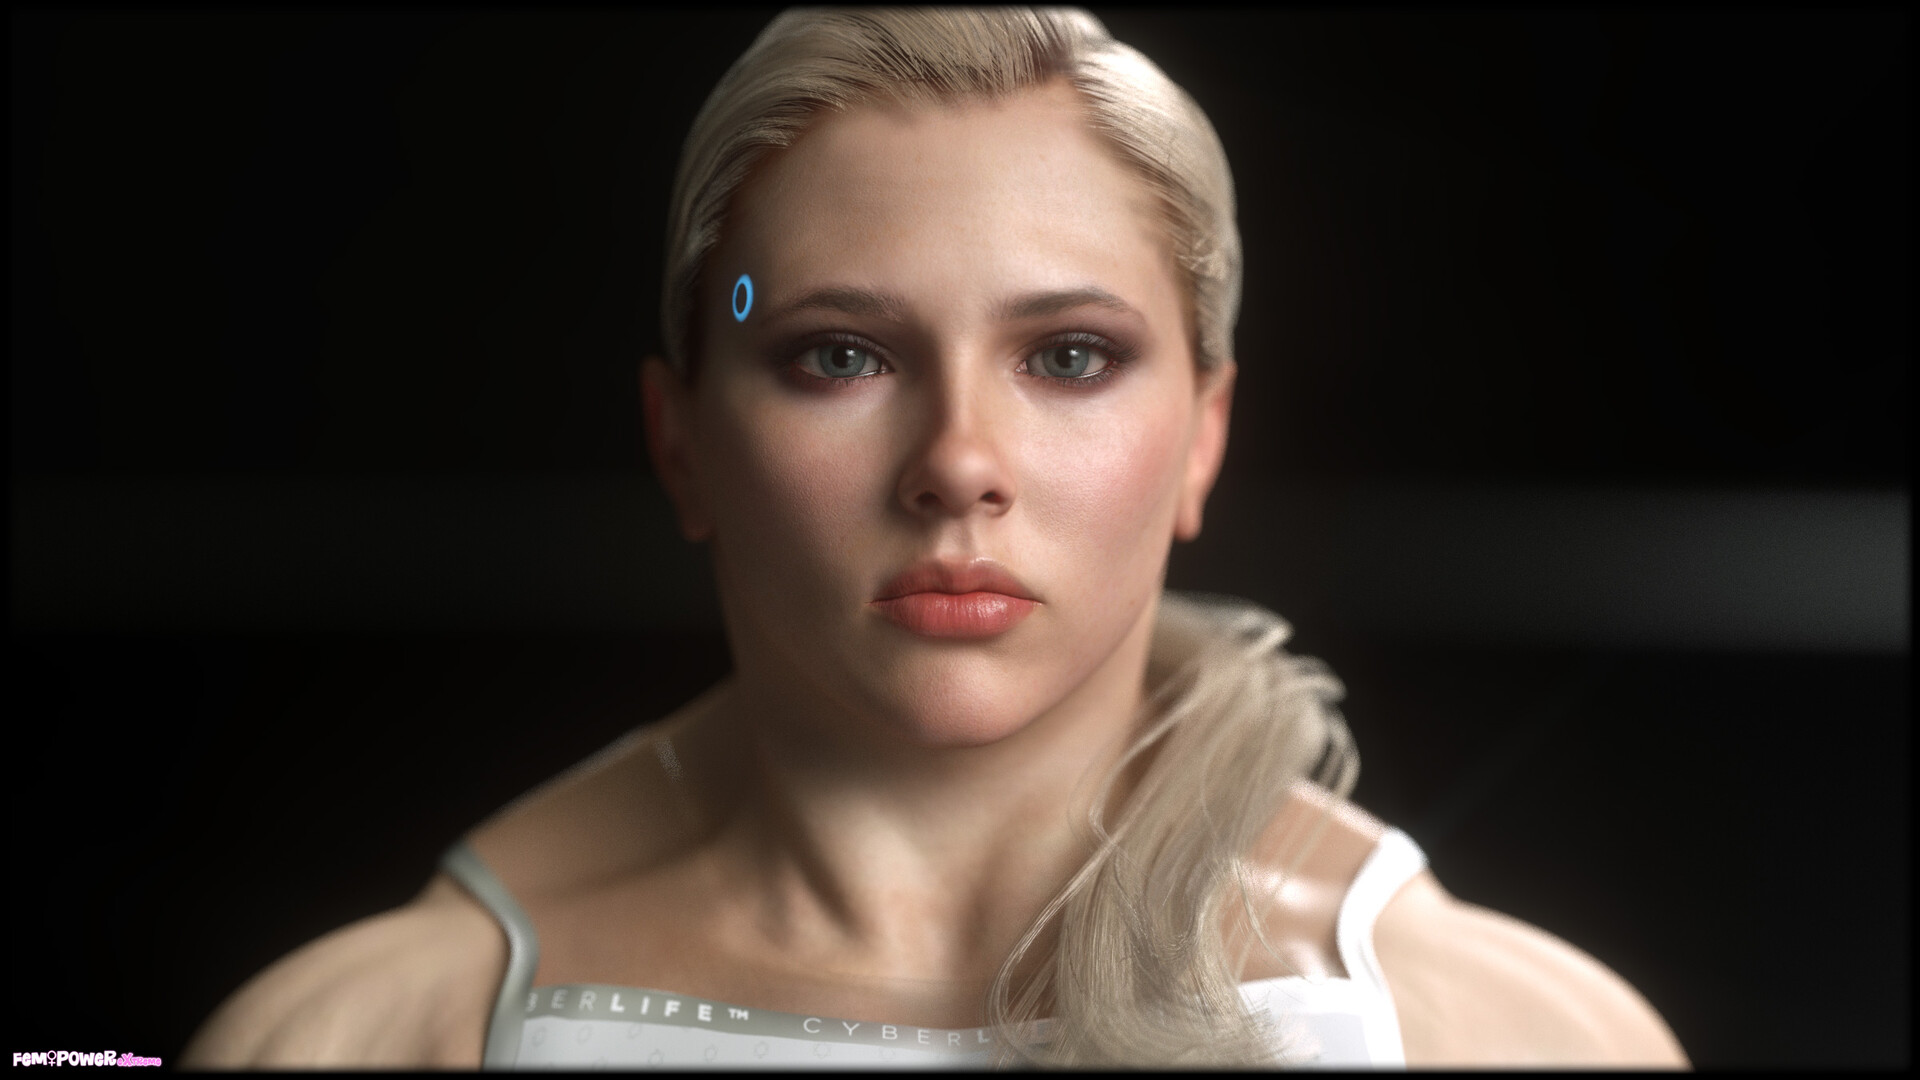 ArtStation - Detroit:Become Human High Supportive Cast